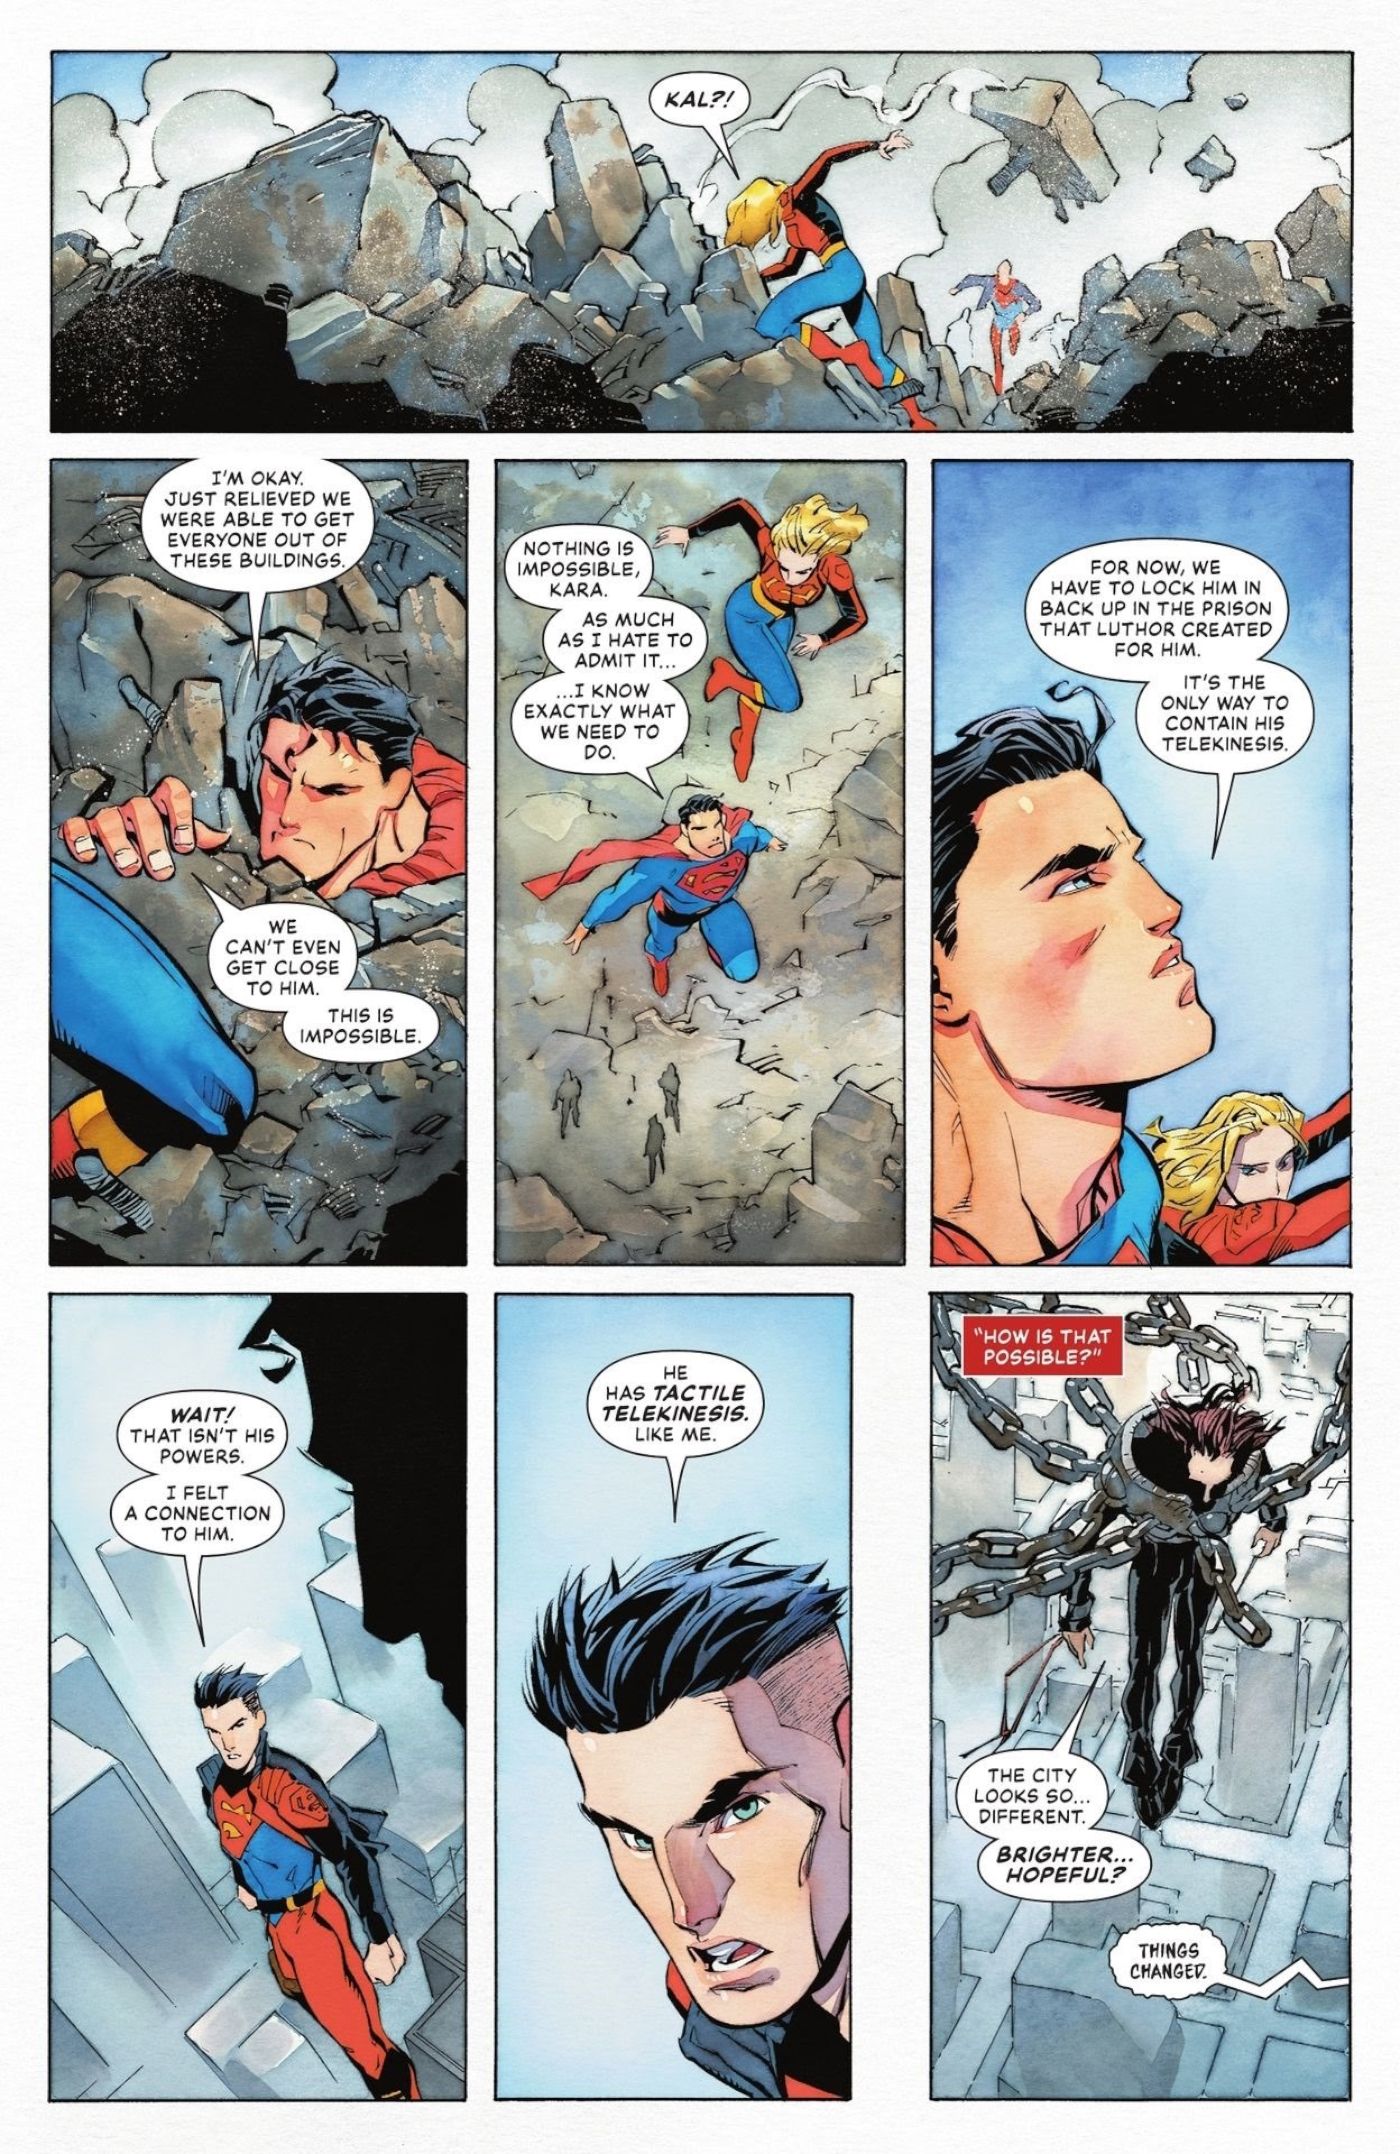 Superboy Admits He Has The Same Powers As Chained